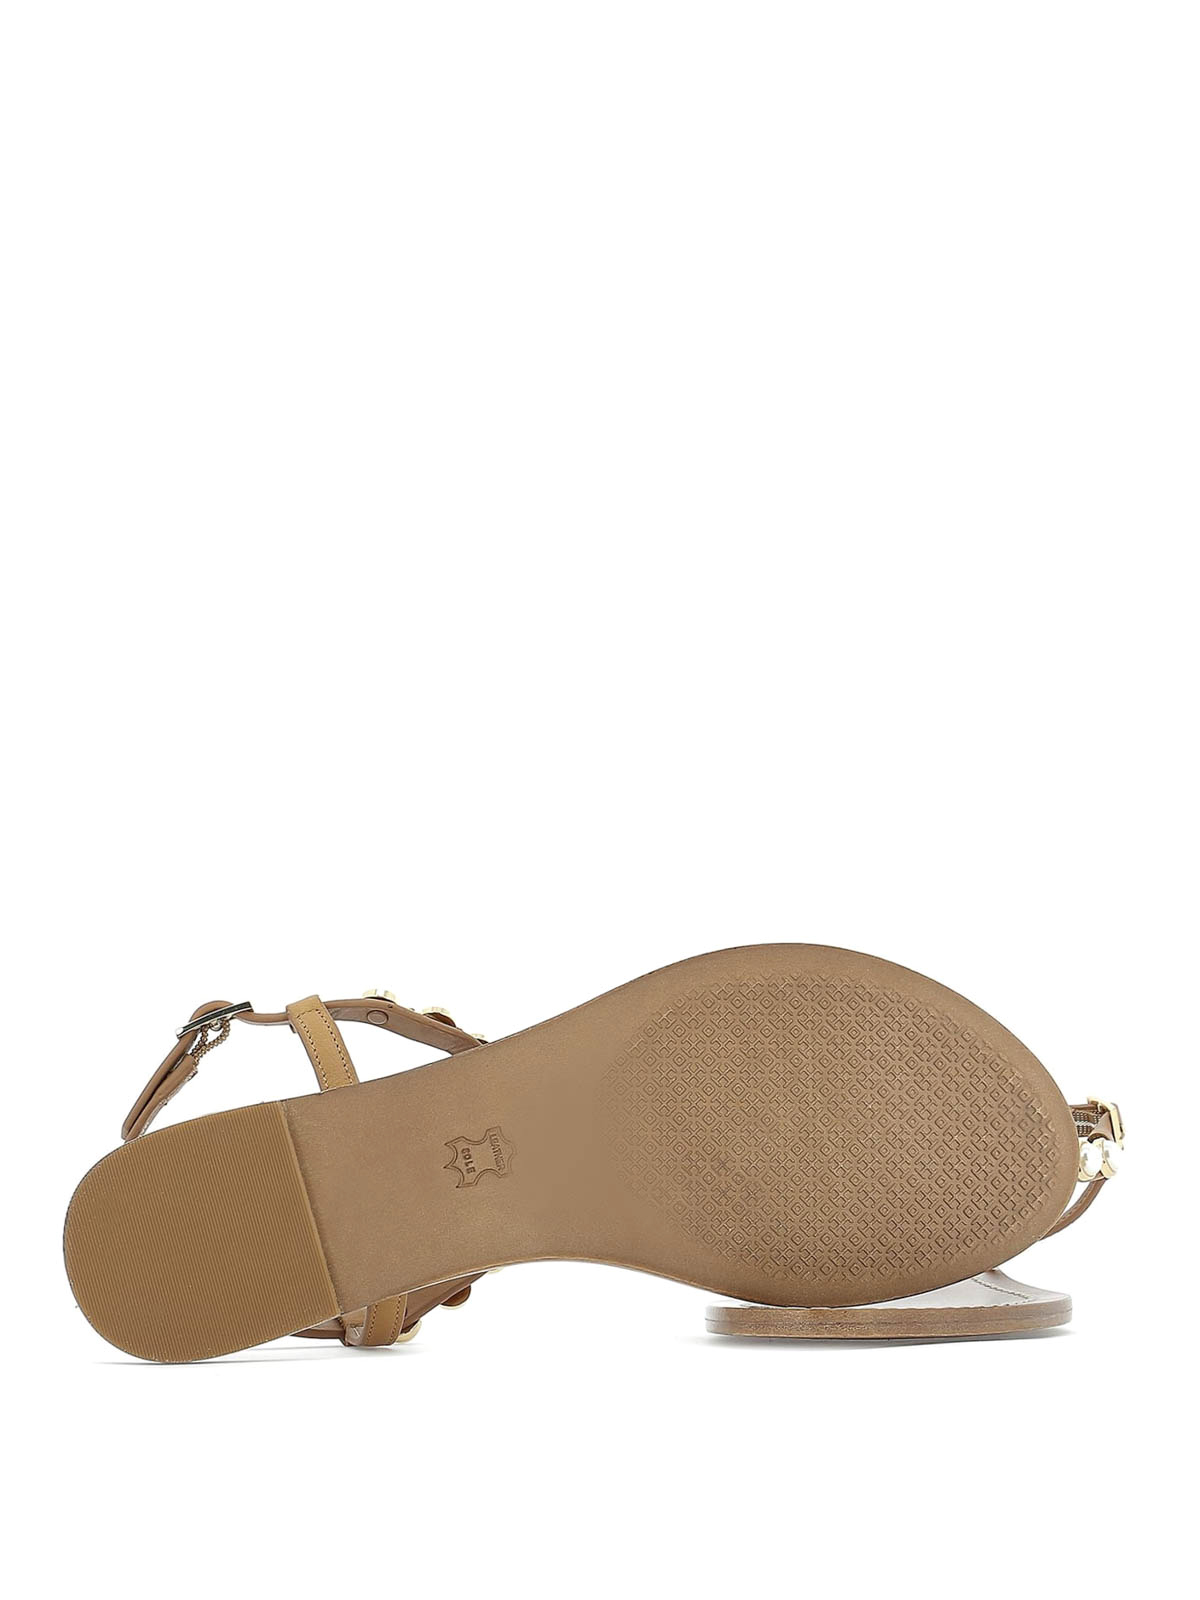 tory burch pearl shoes